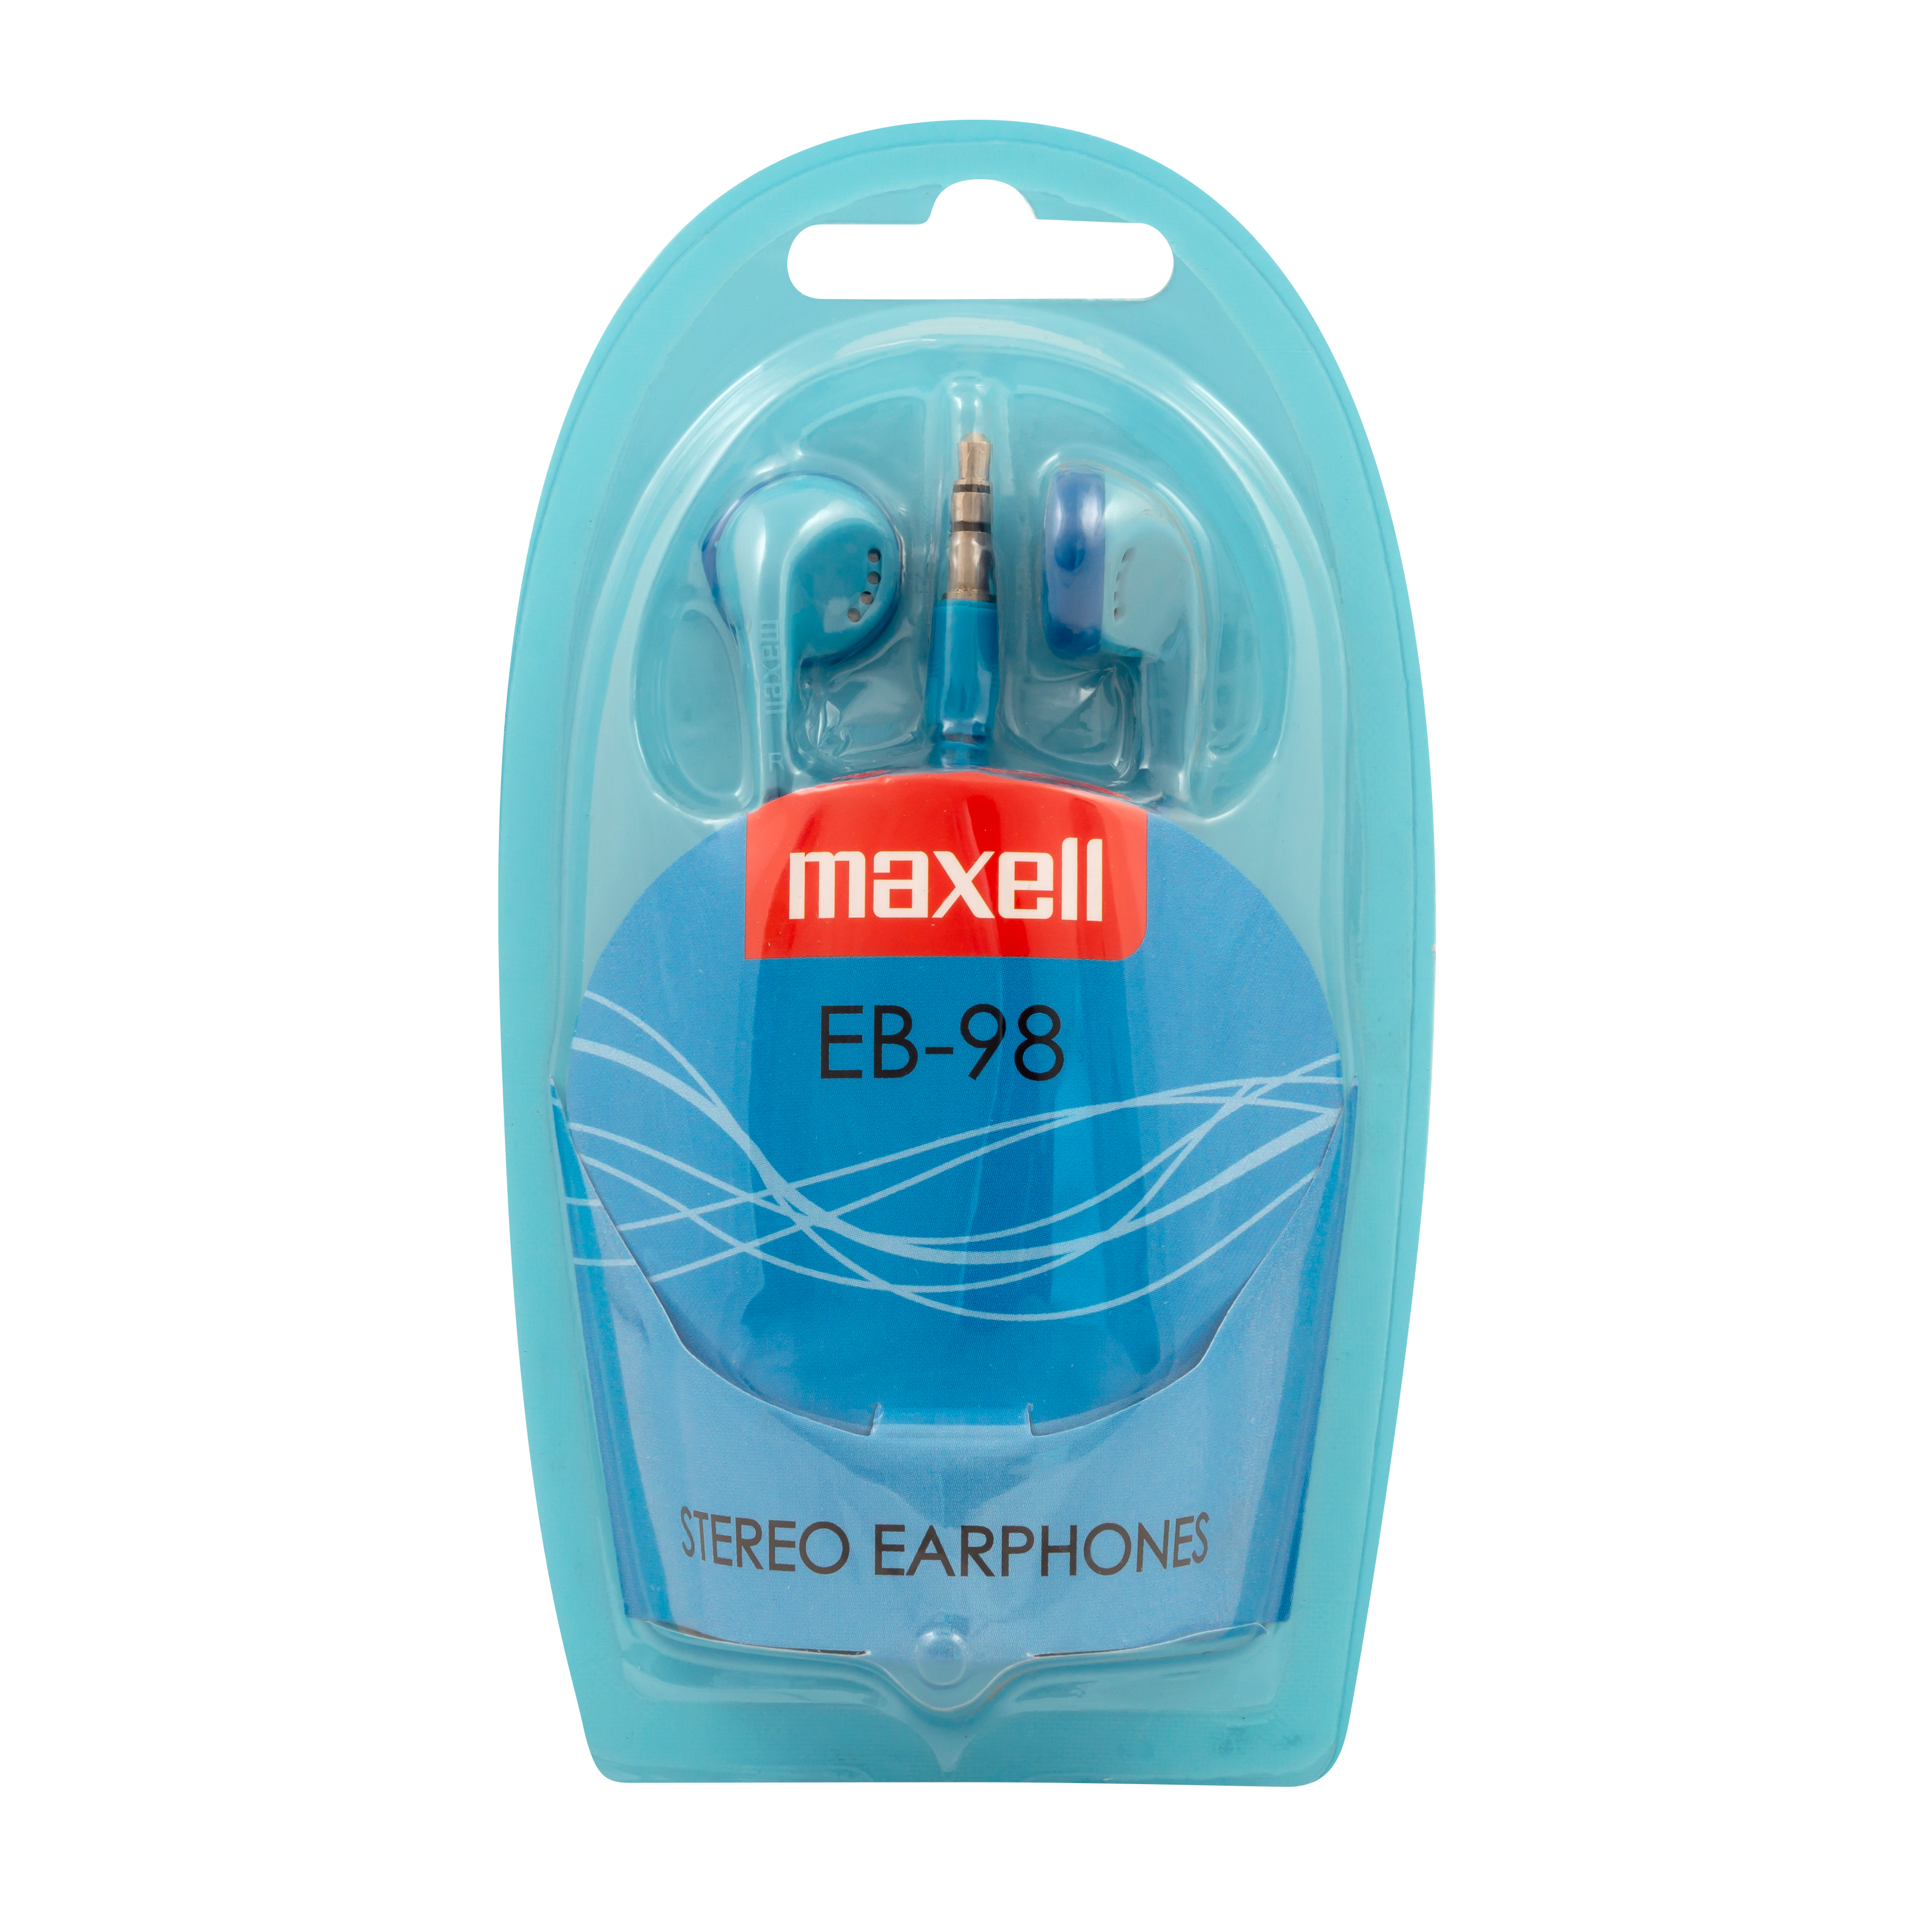 Maxell Brand EB-98 Stereo Earphones Silver NEW 